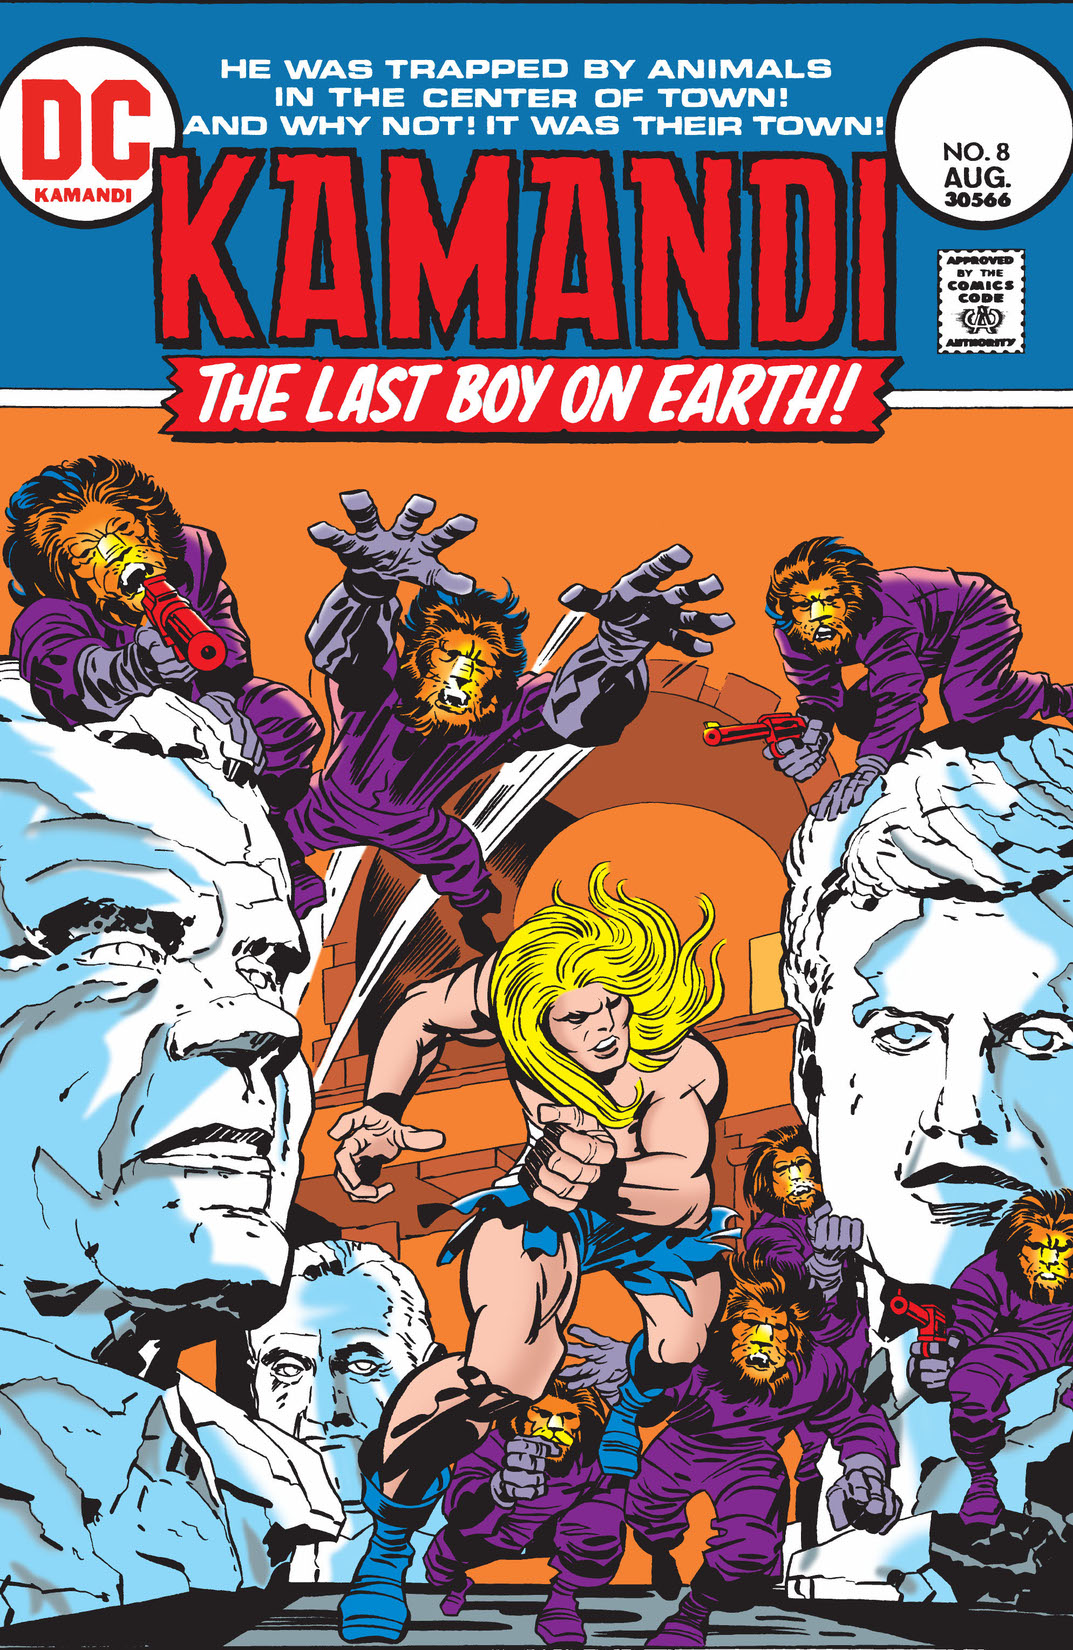 Kamandi: The Last Boy on Earth #8 preview images